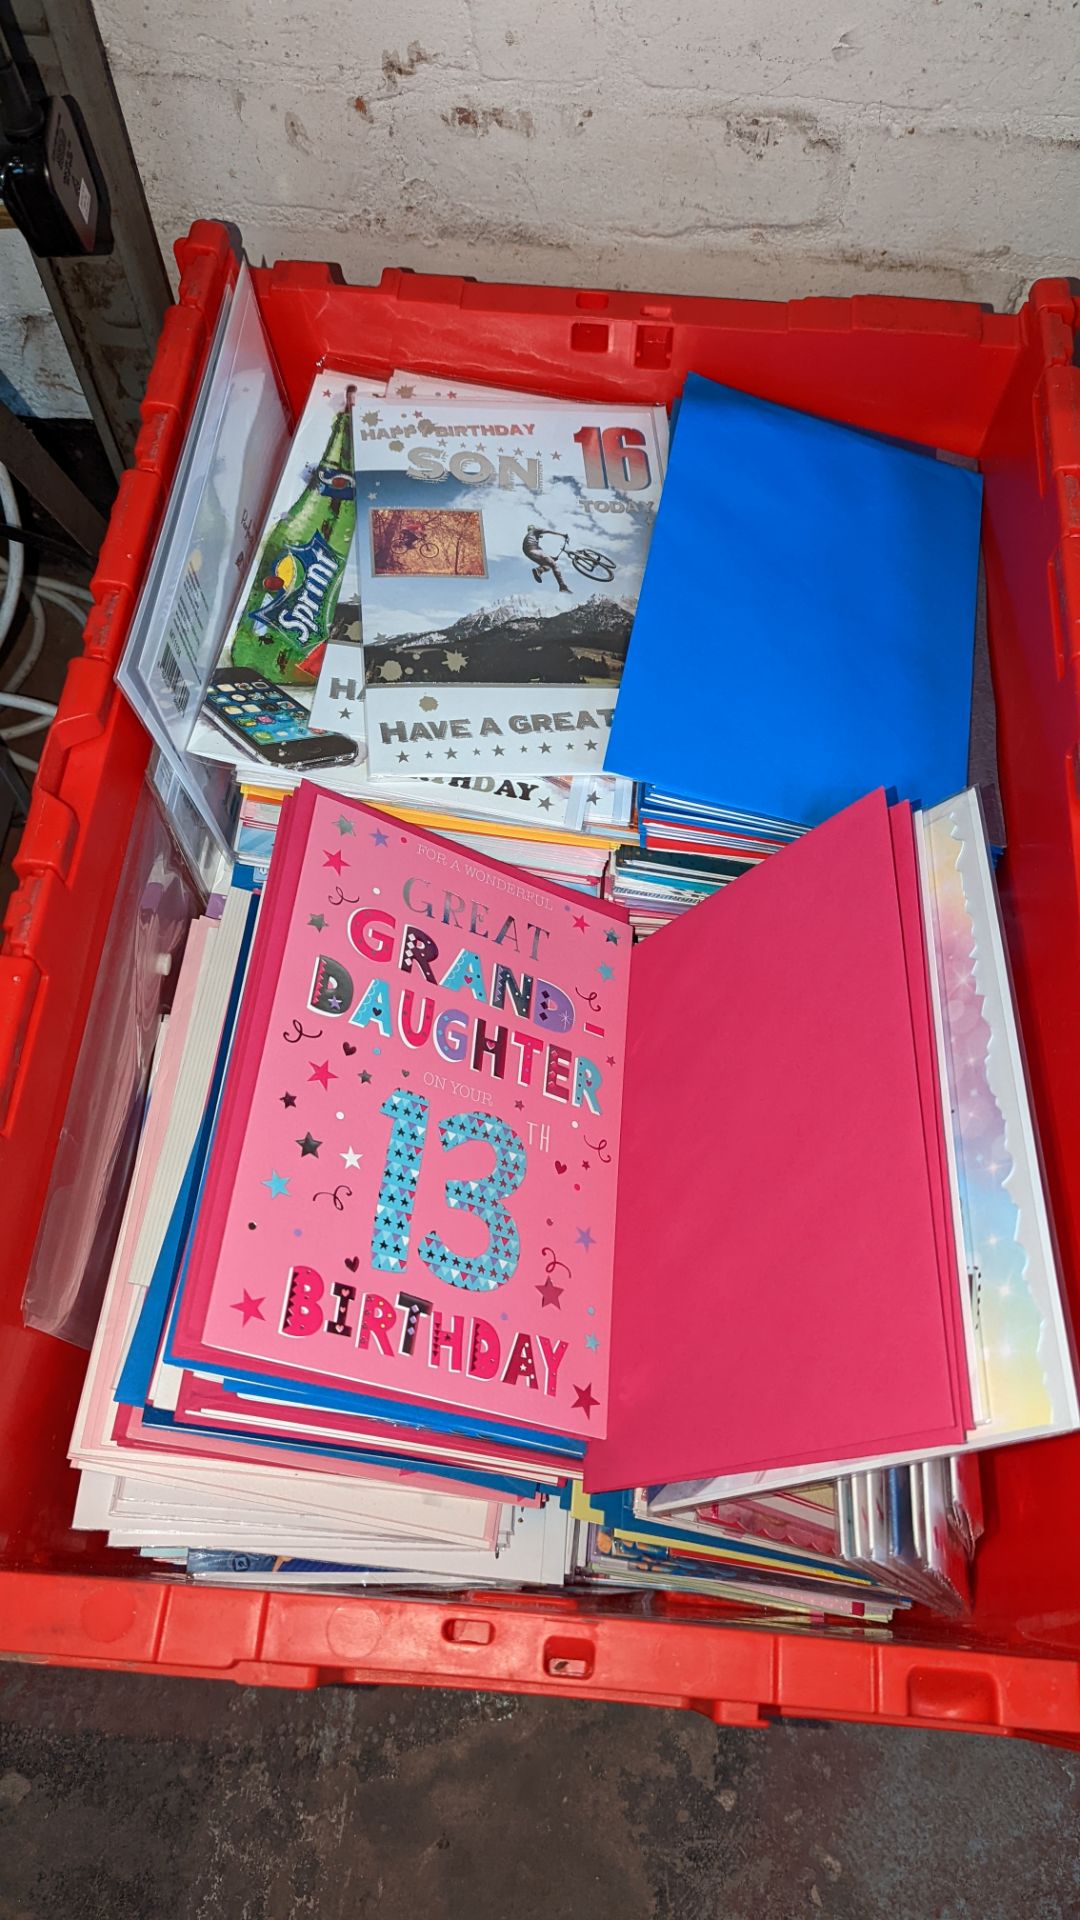 Contents of a crate of greetings cards - crate excluded - Image 5 of 11